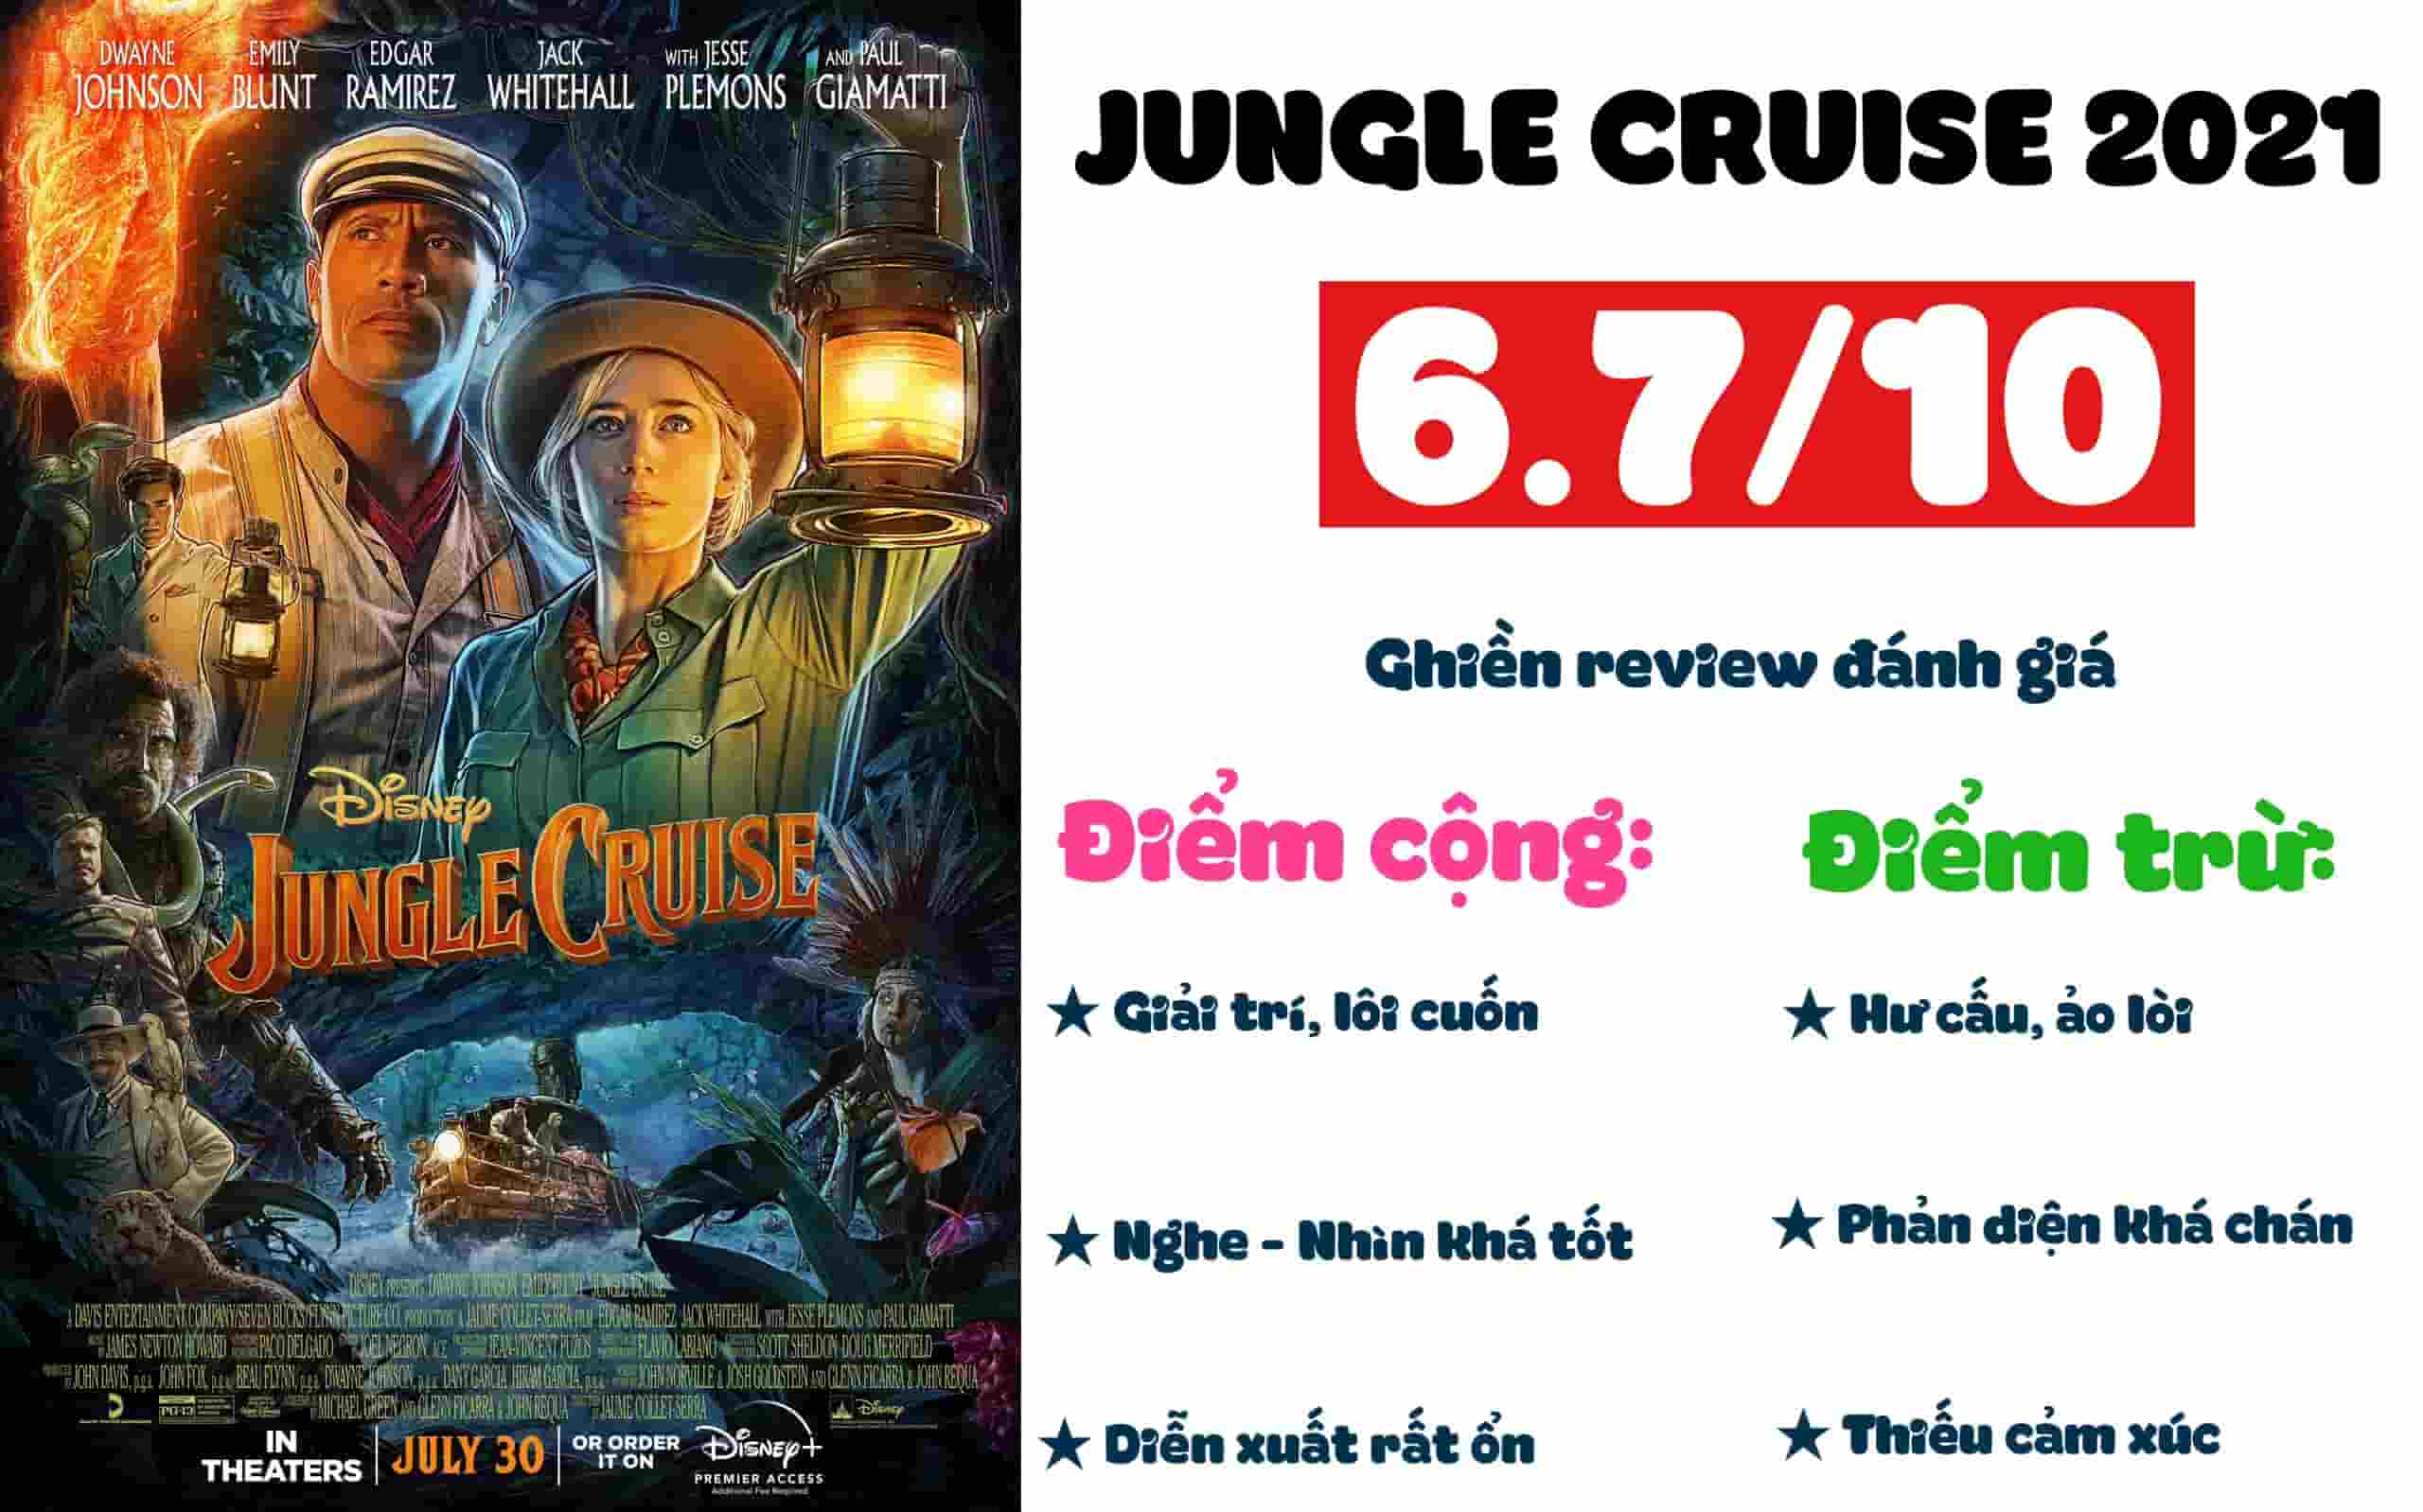 Ghien review - Jungle Cruise 2021